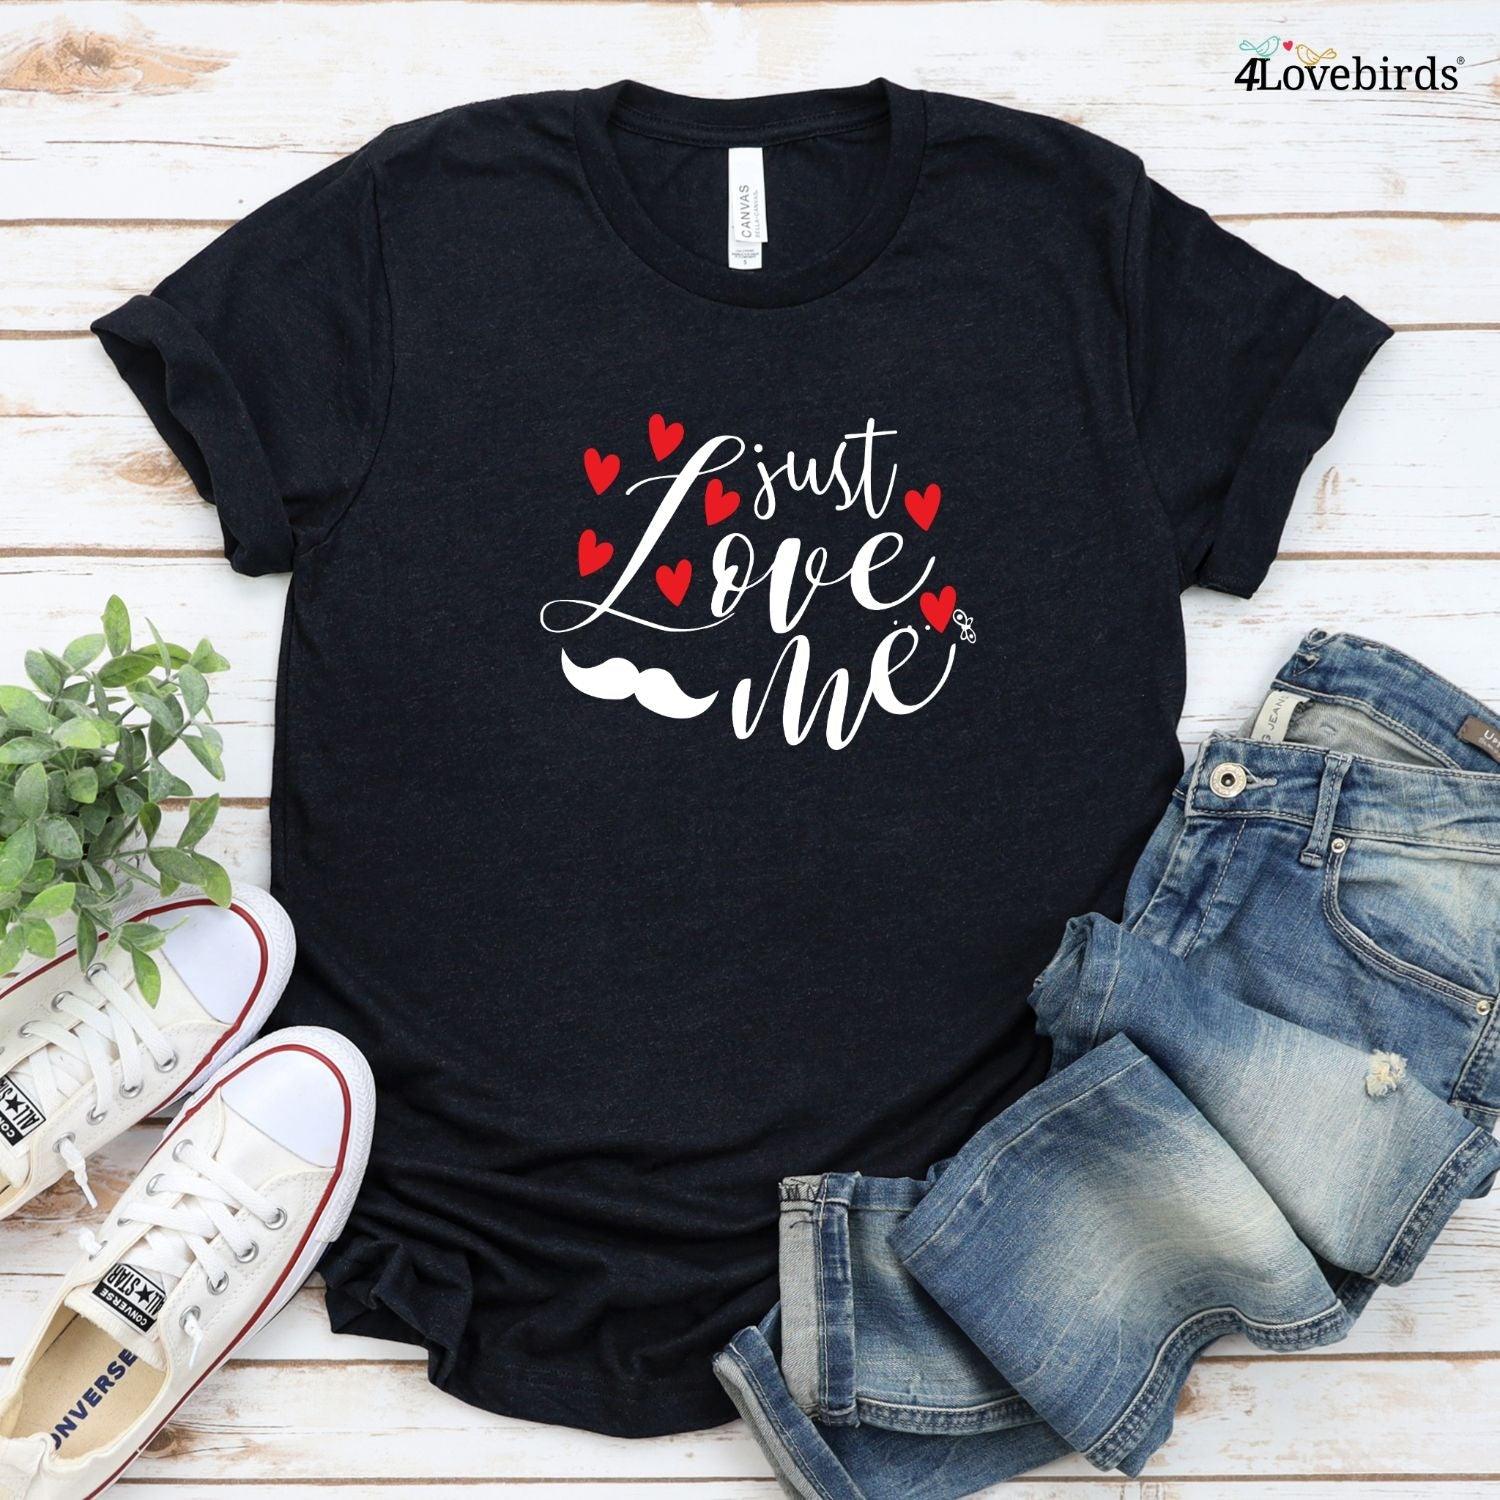 Couples Matching Set: Just Love Me Attire, Lovers Tee, Perfect Valentine's Day Gift - 4Lovebirds